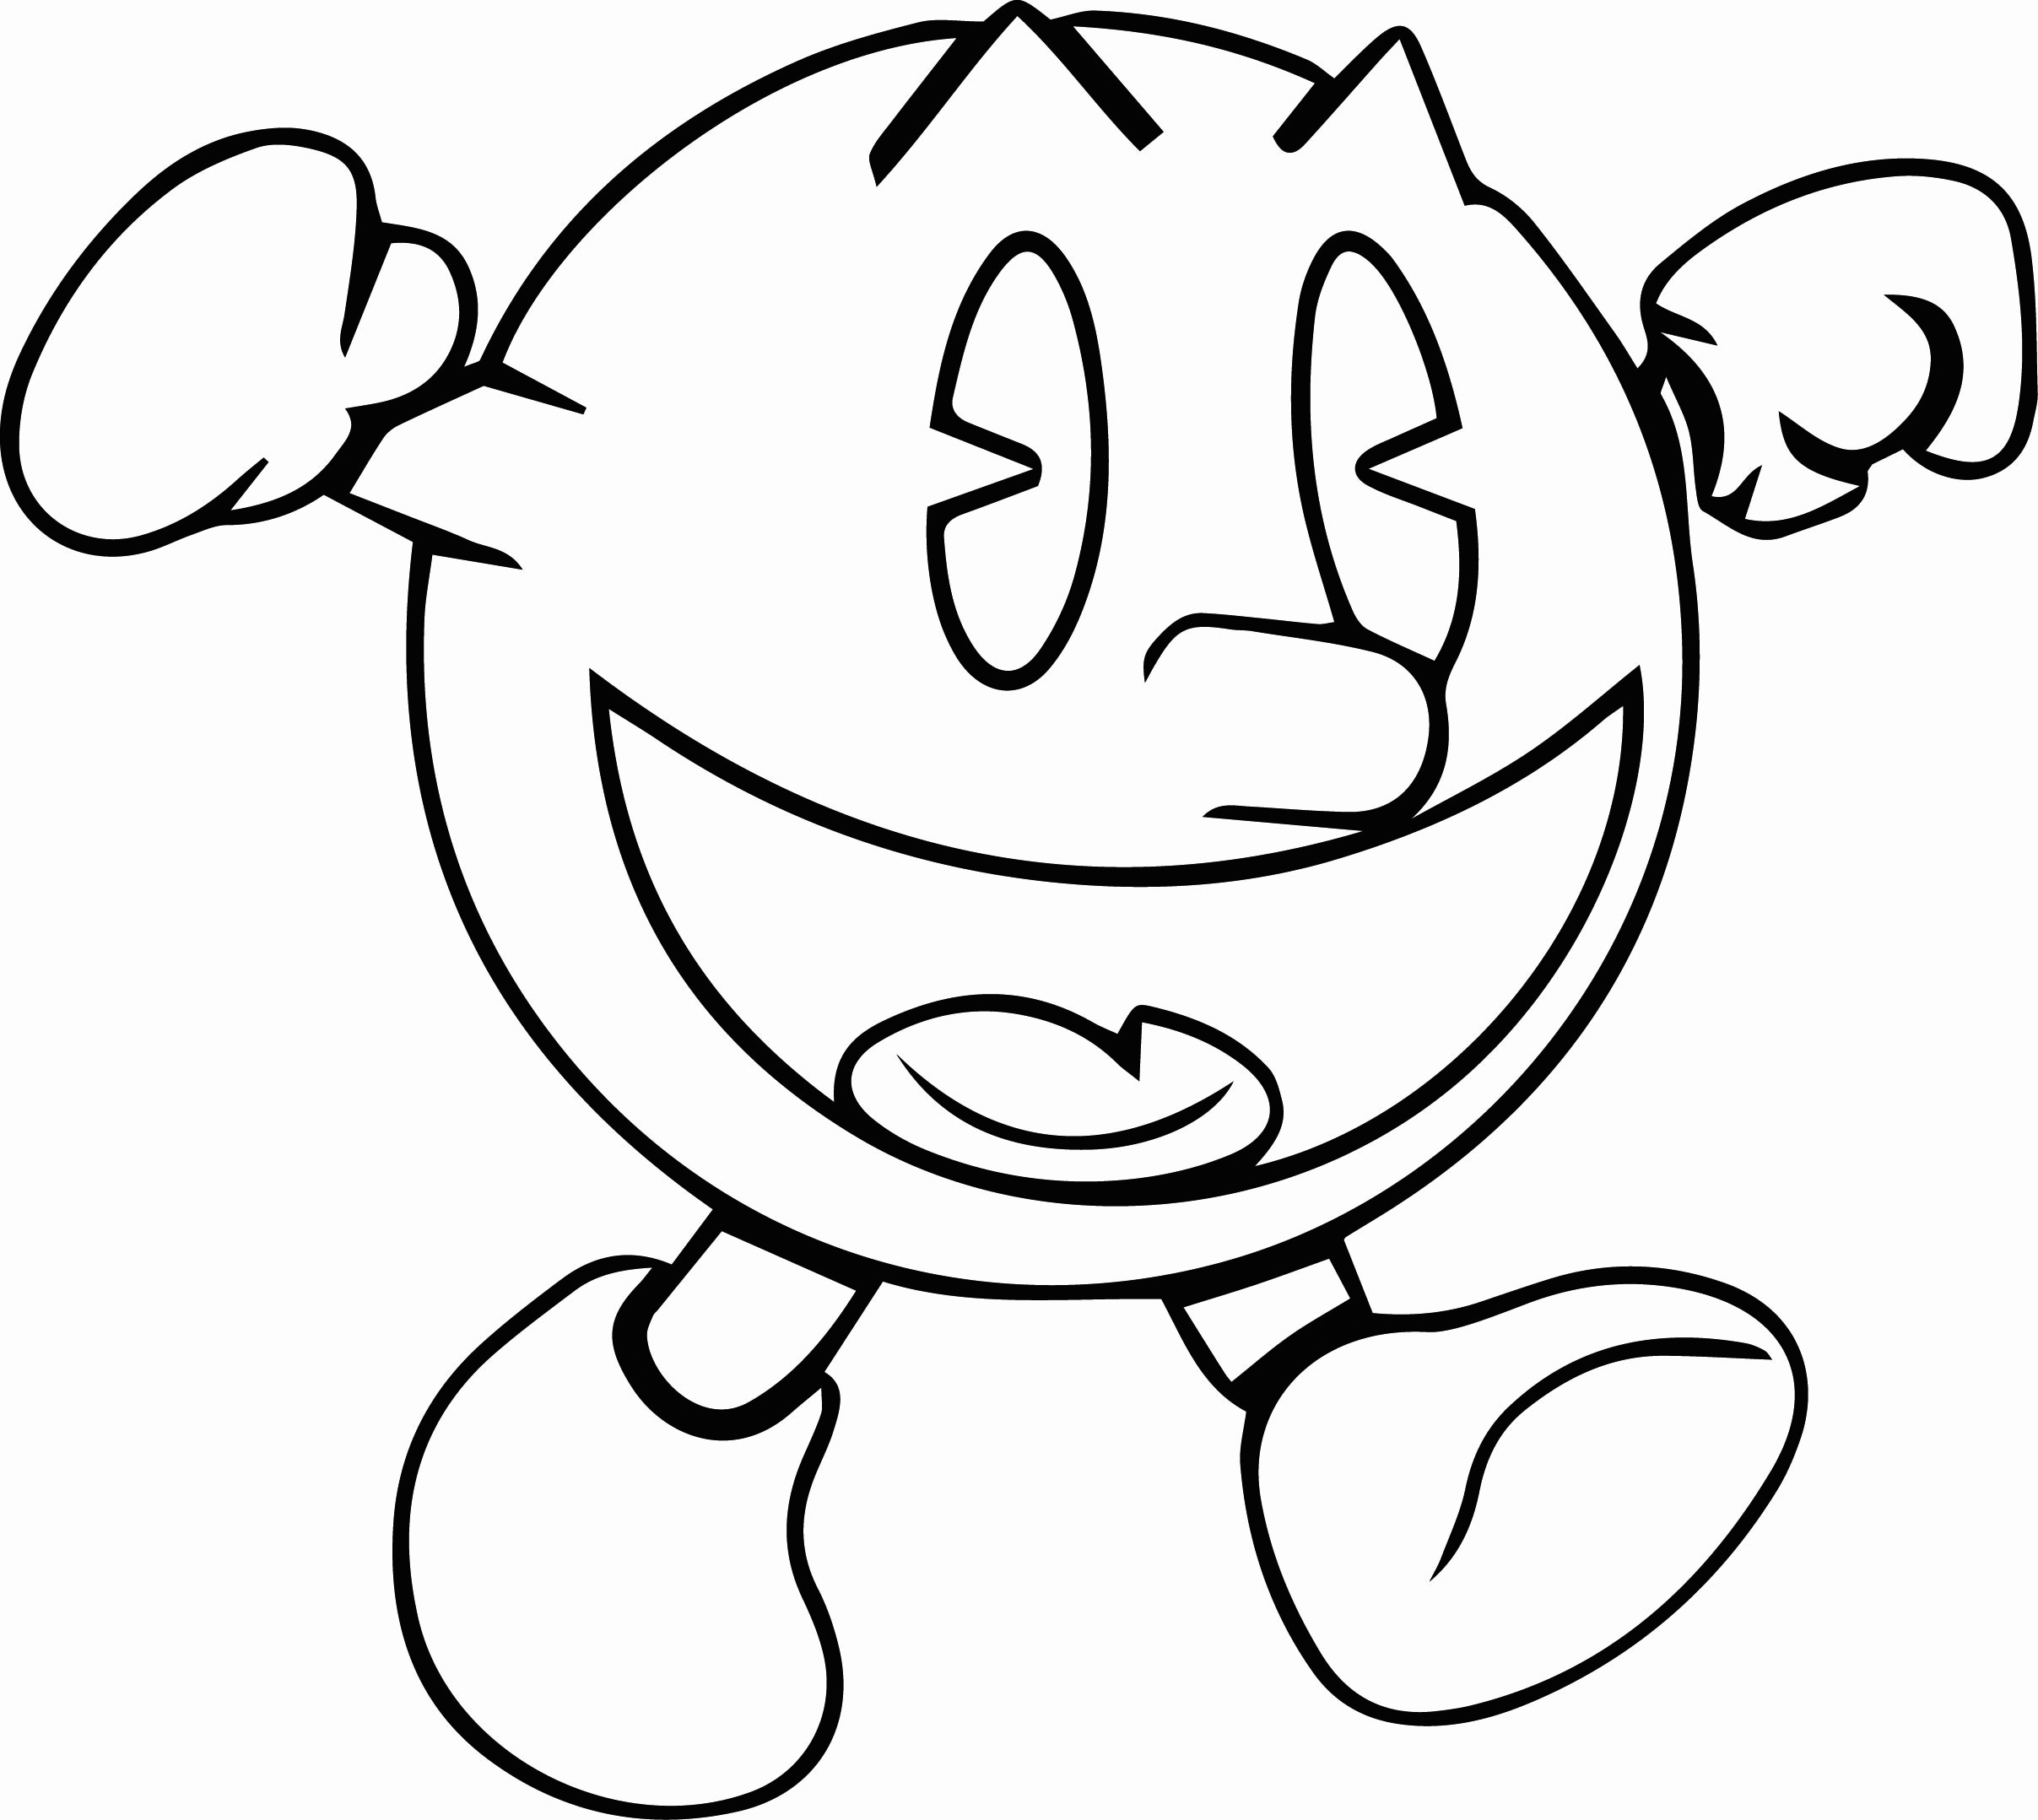 PacMan Coloring Pages Best Coloring Pages For Kids